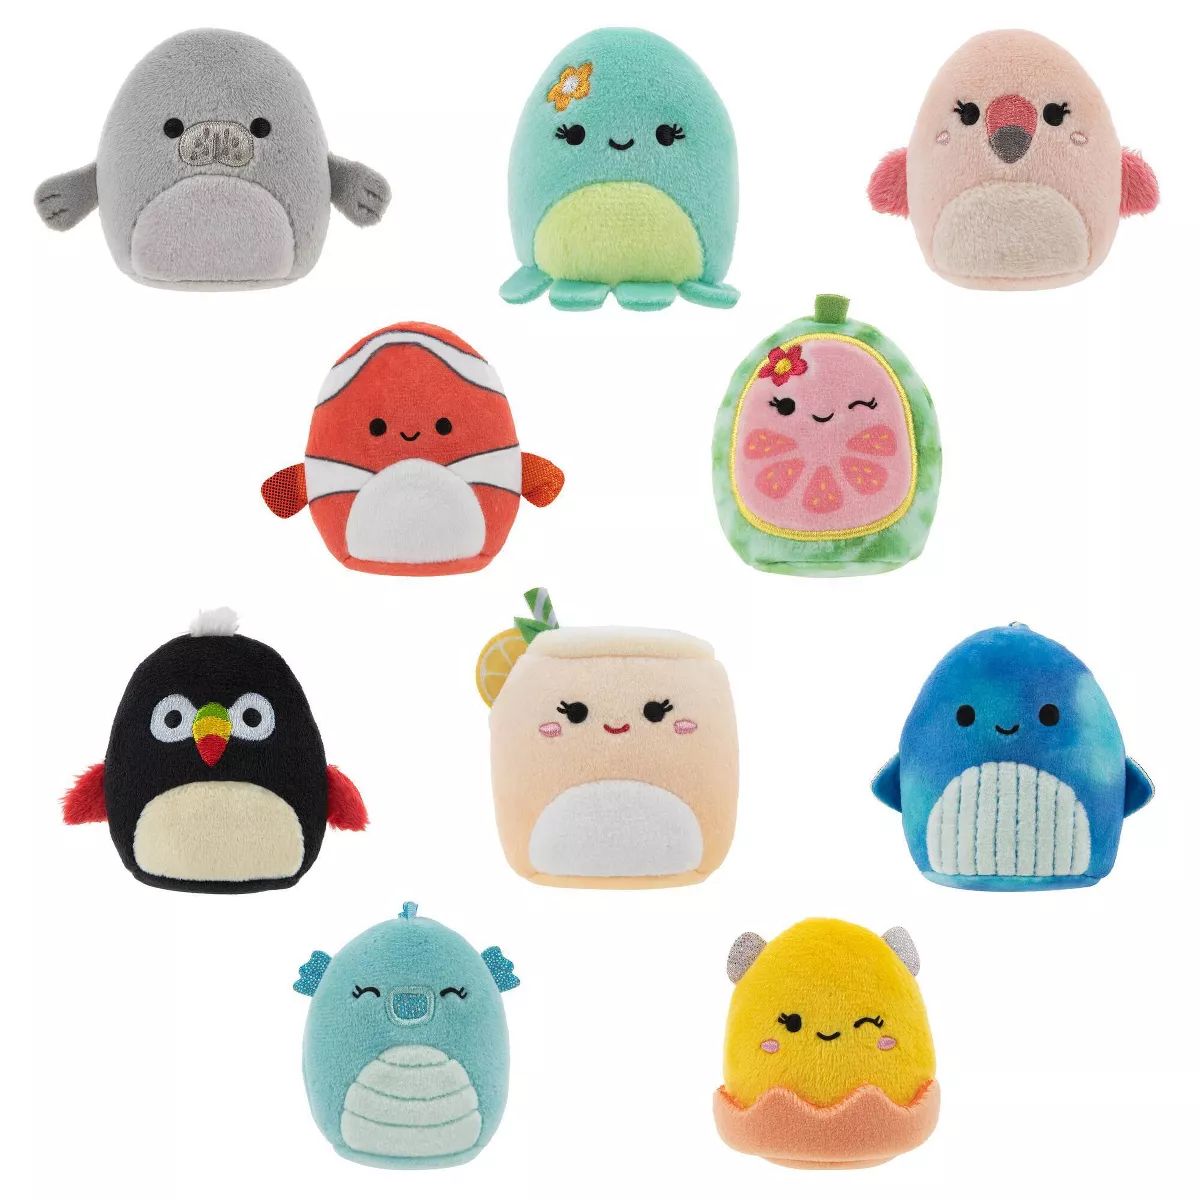 Squishville by Squishmallows Vacation Squad 2" Plush Toy - 10 pack (Target Exclusive) | Target